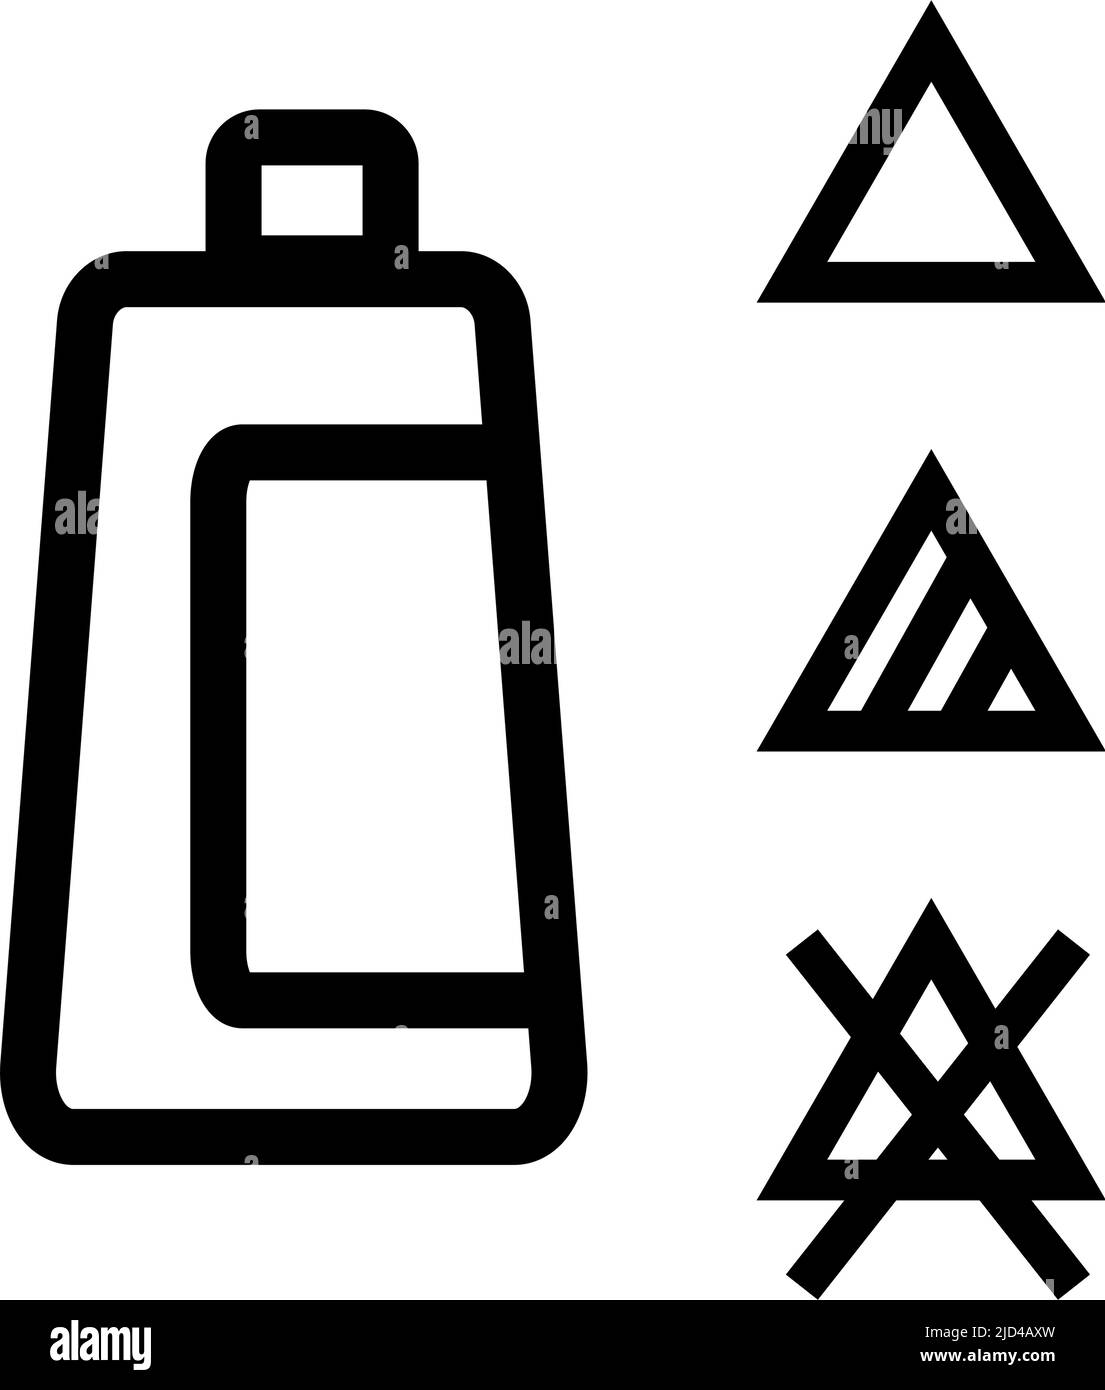 Set of icons of detergent bottles and bleaching symbols. Editable vector. Stock Vector